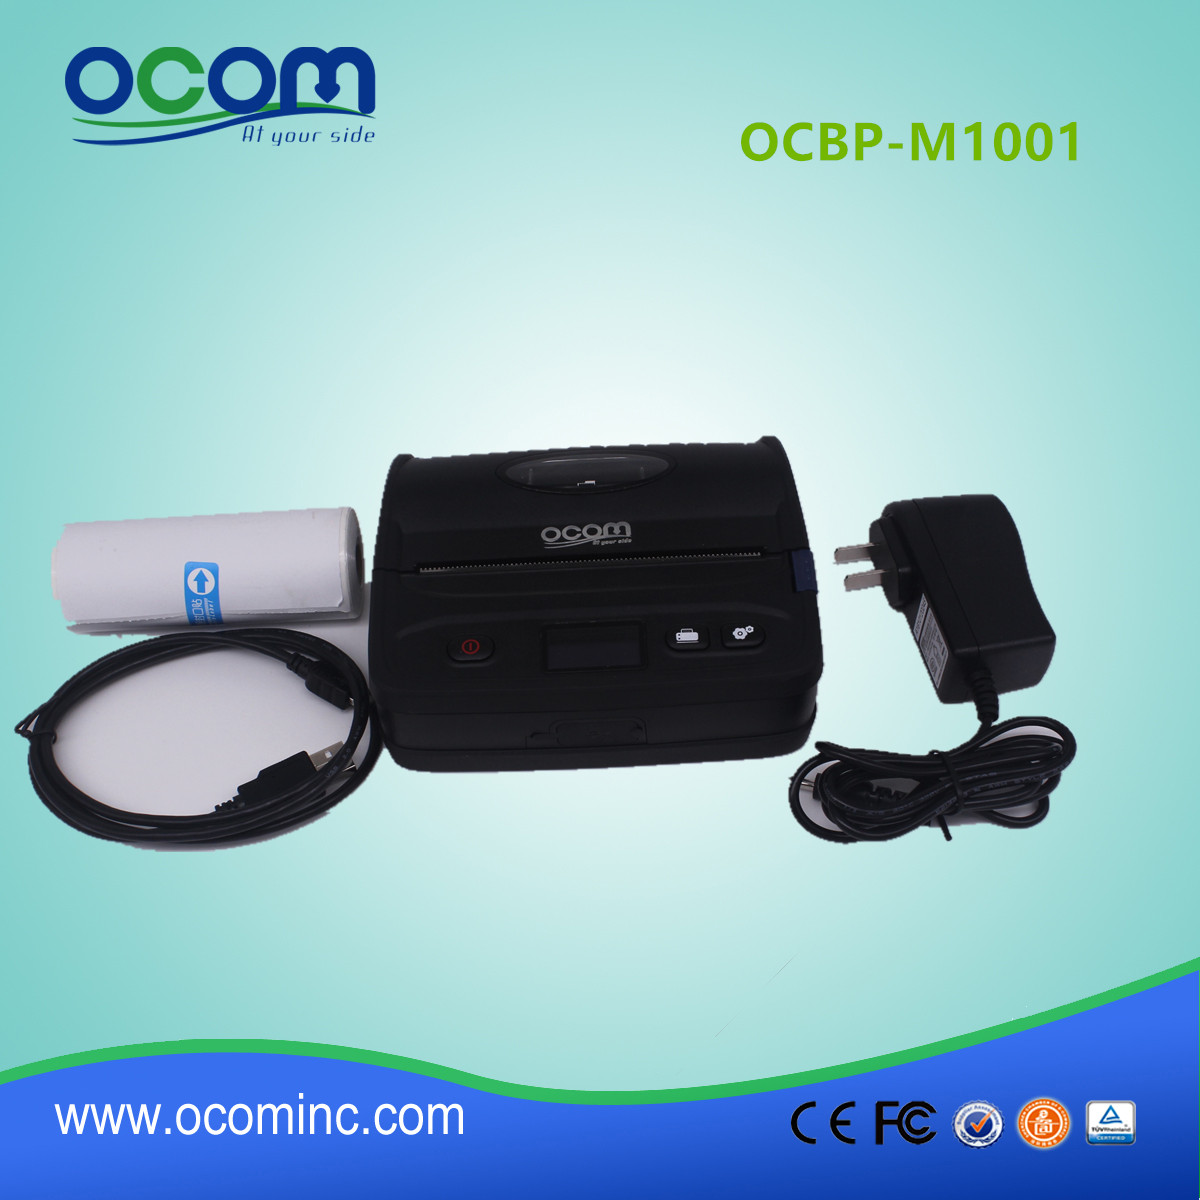 108mm Portbale Barcode label printer with Bluetooth(OCBP-M1001)